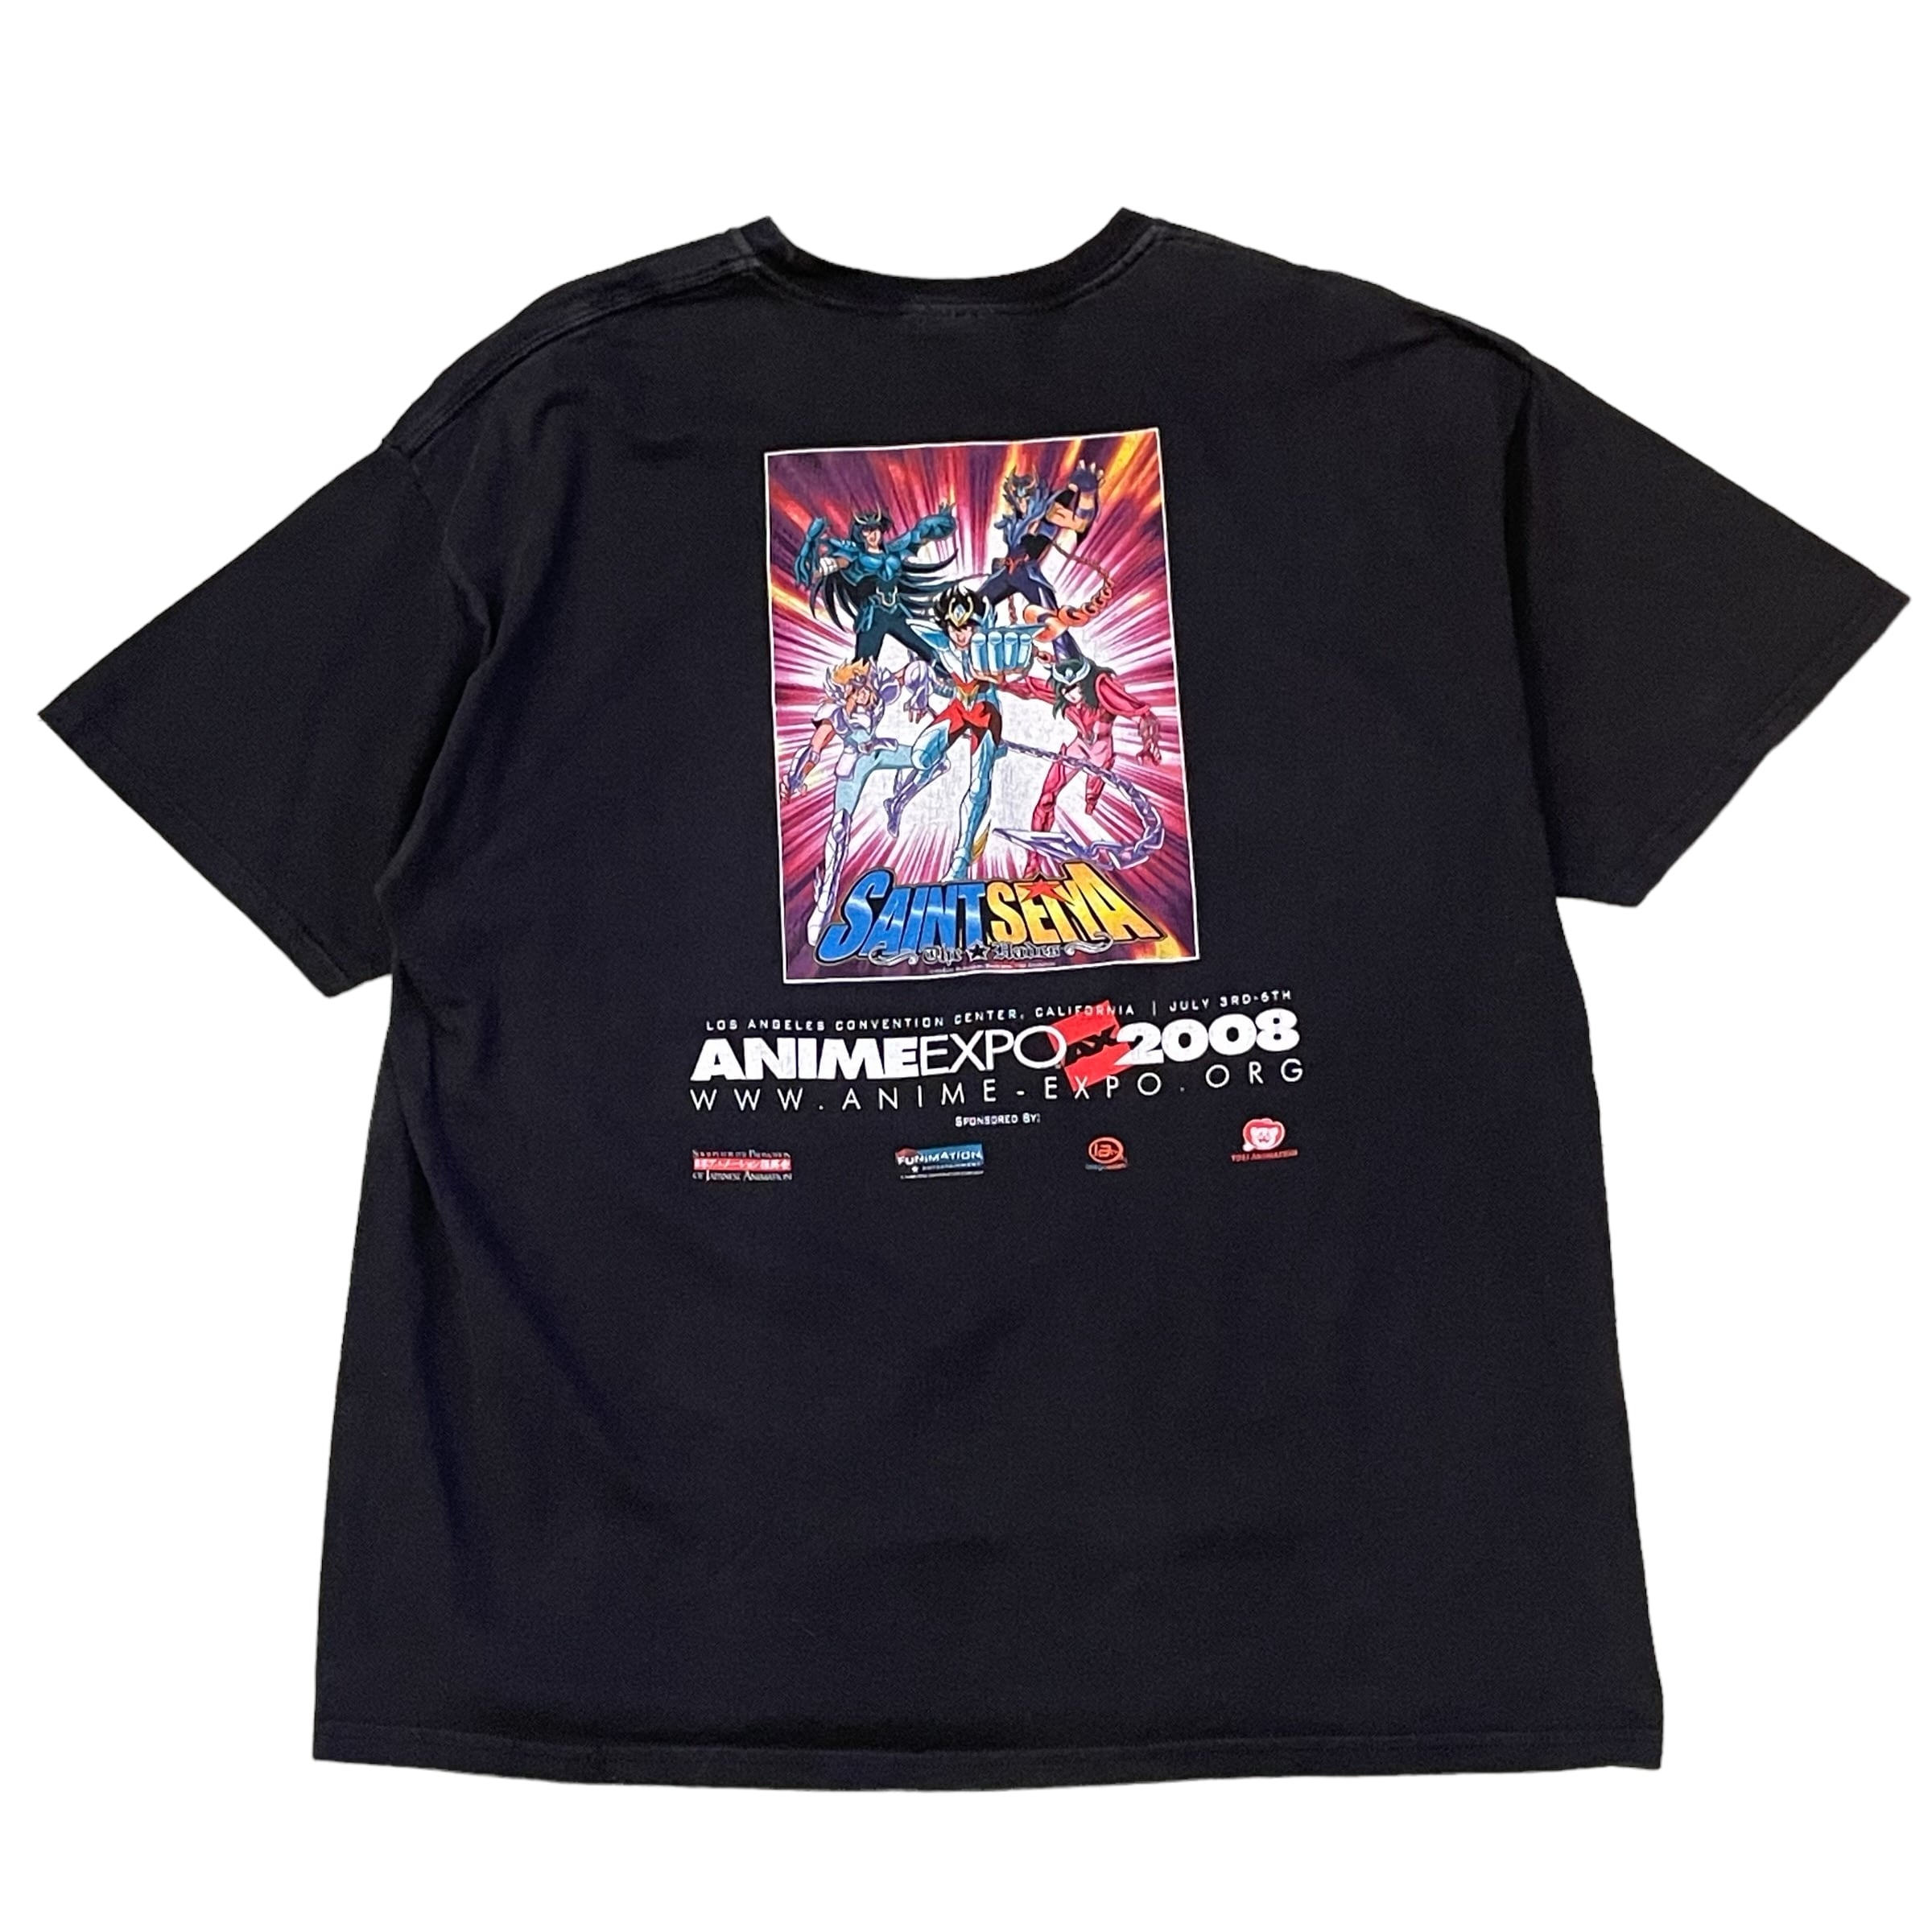 2008s ANIME EXPO STAFF “聖闘士星矢” t-shirt | What'z up